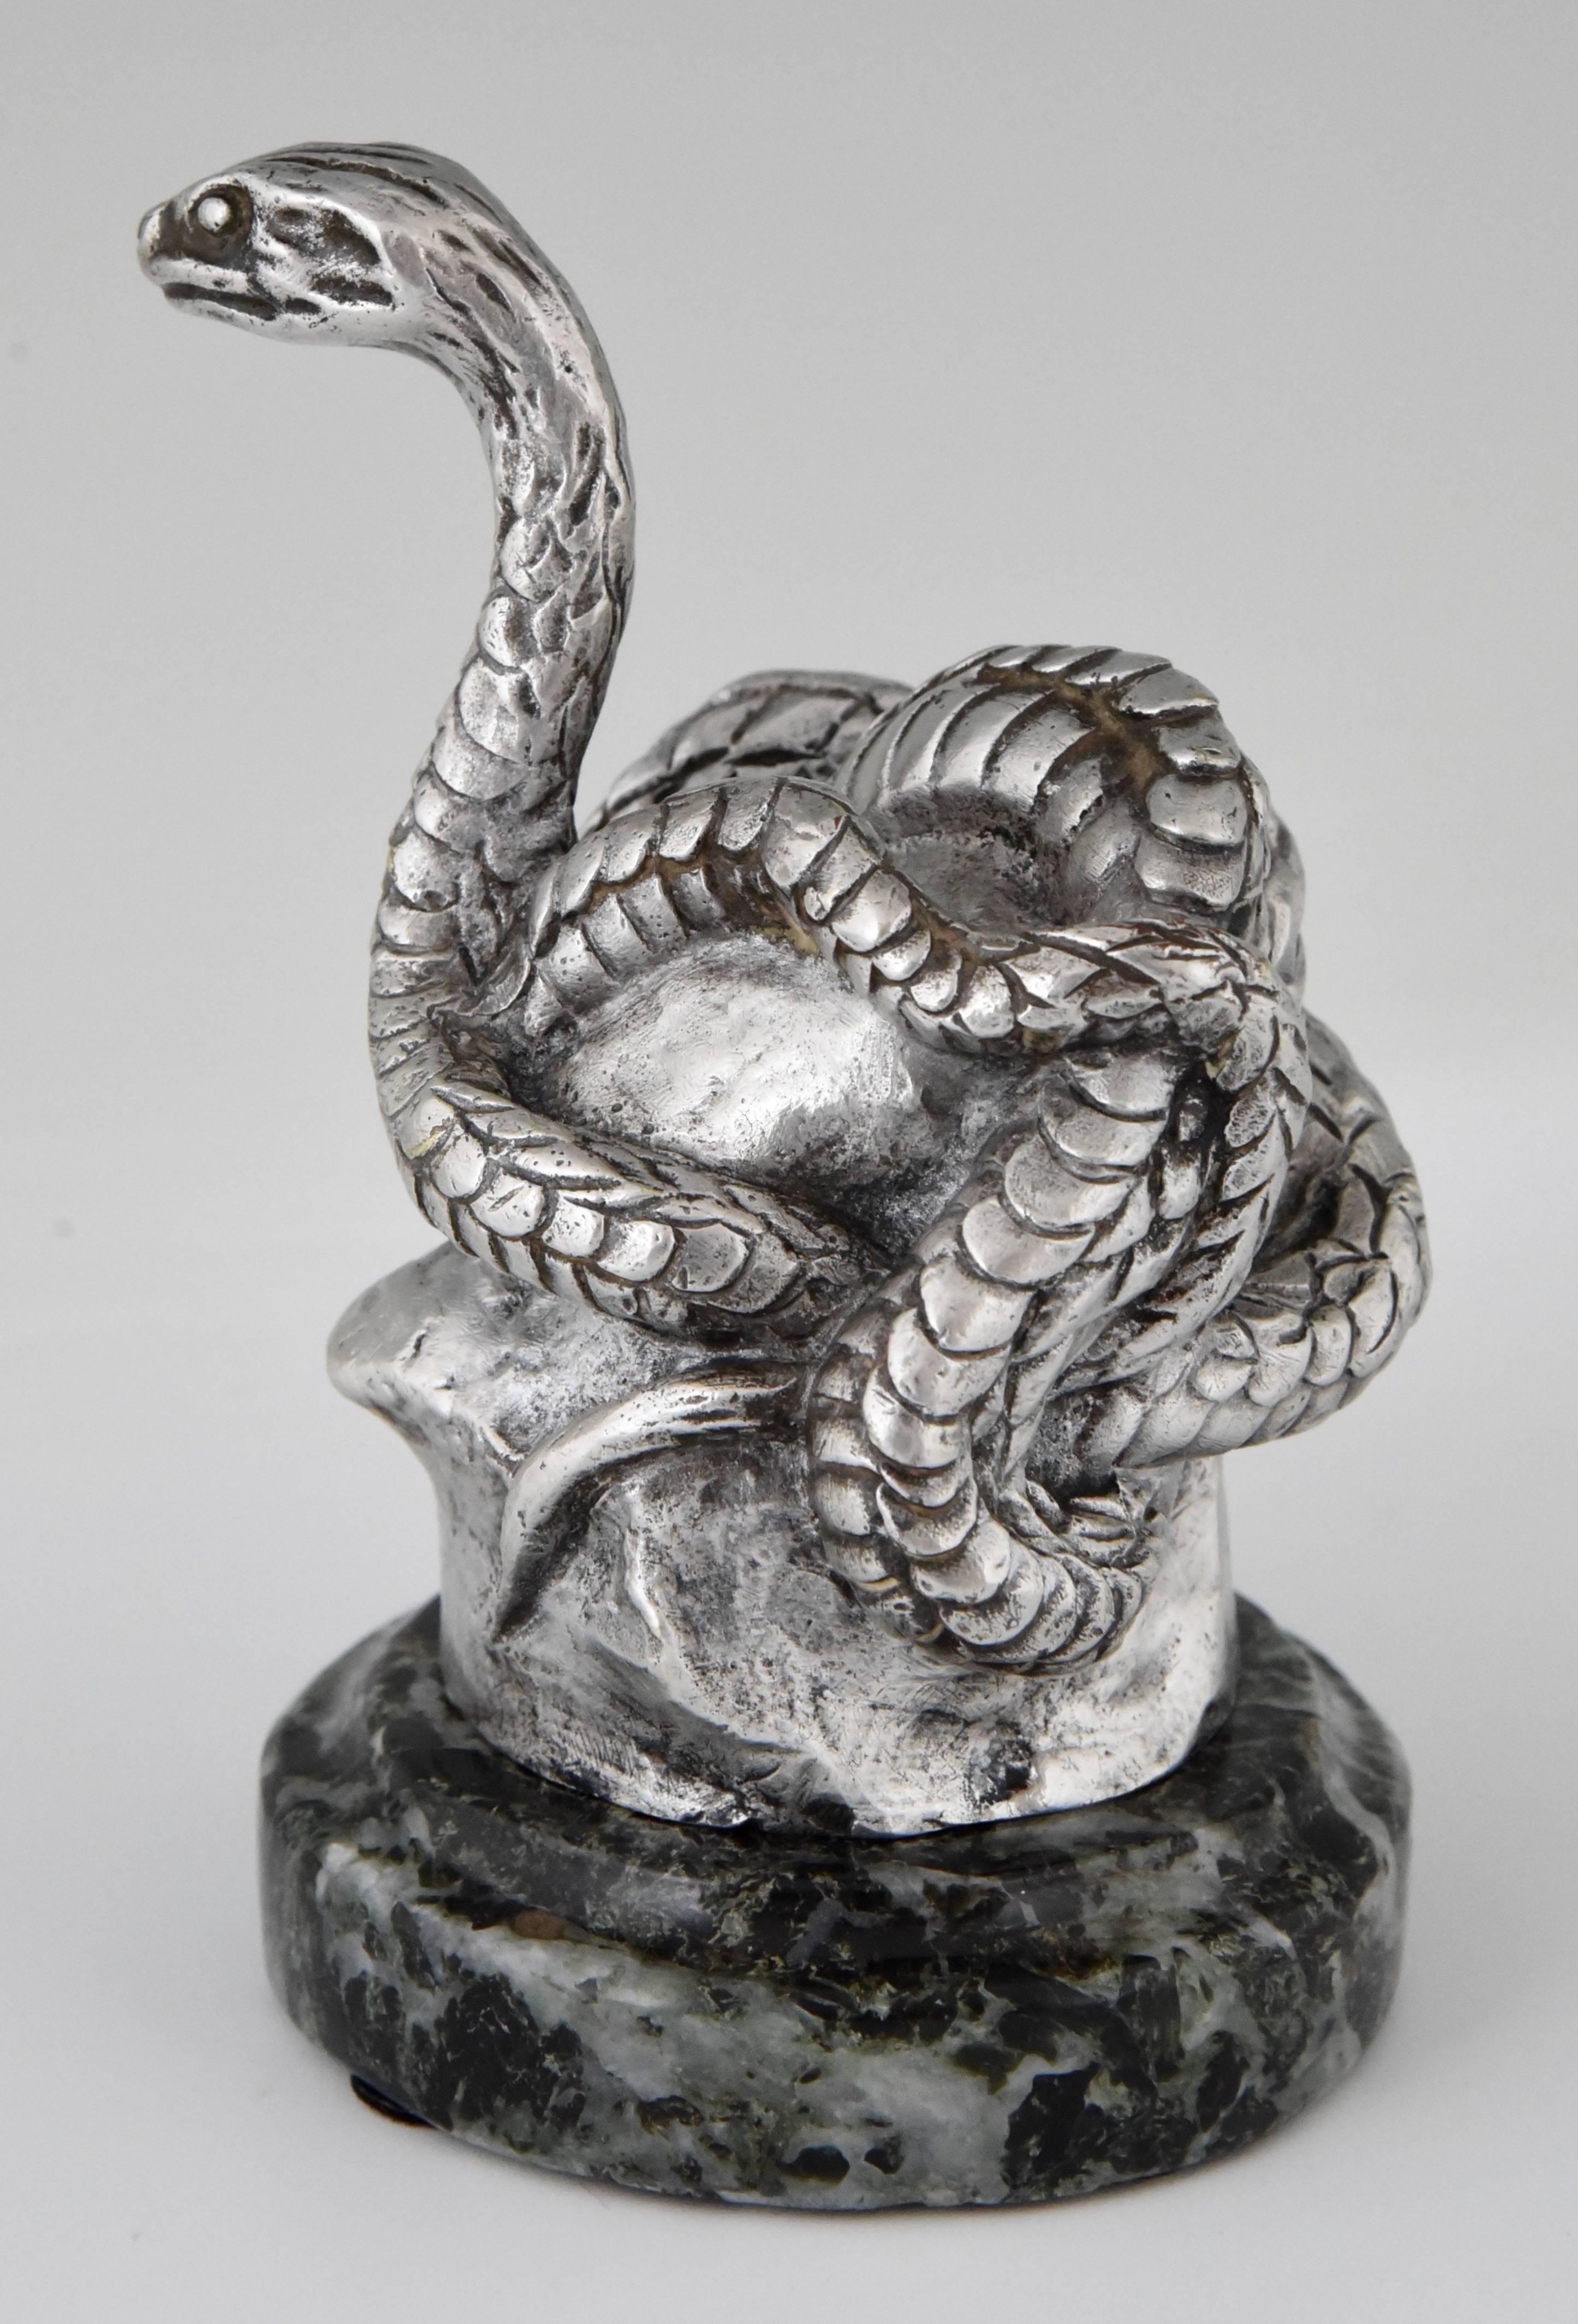 Hard to find antique bronze car mascot modelled as a snake by the French artist Antoine Bofill, signed and stamped by the foundry. The silvered bronze sculpture is mounted on a green marble base. 

Artist/ Maker: Antoine Bofill
Signature/ Marks: